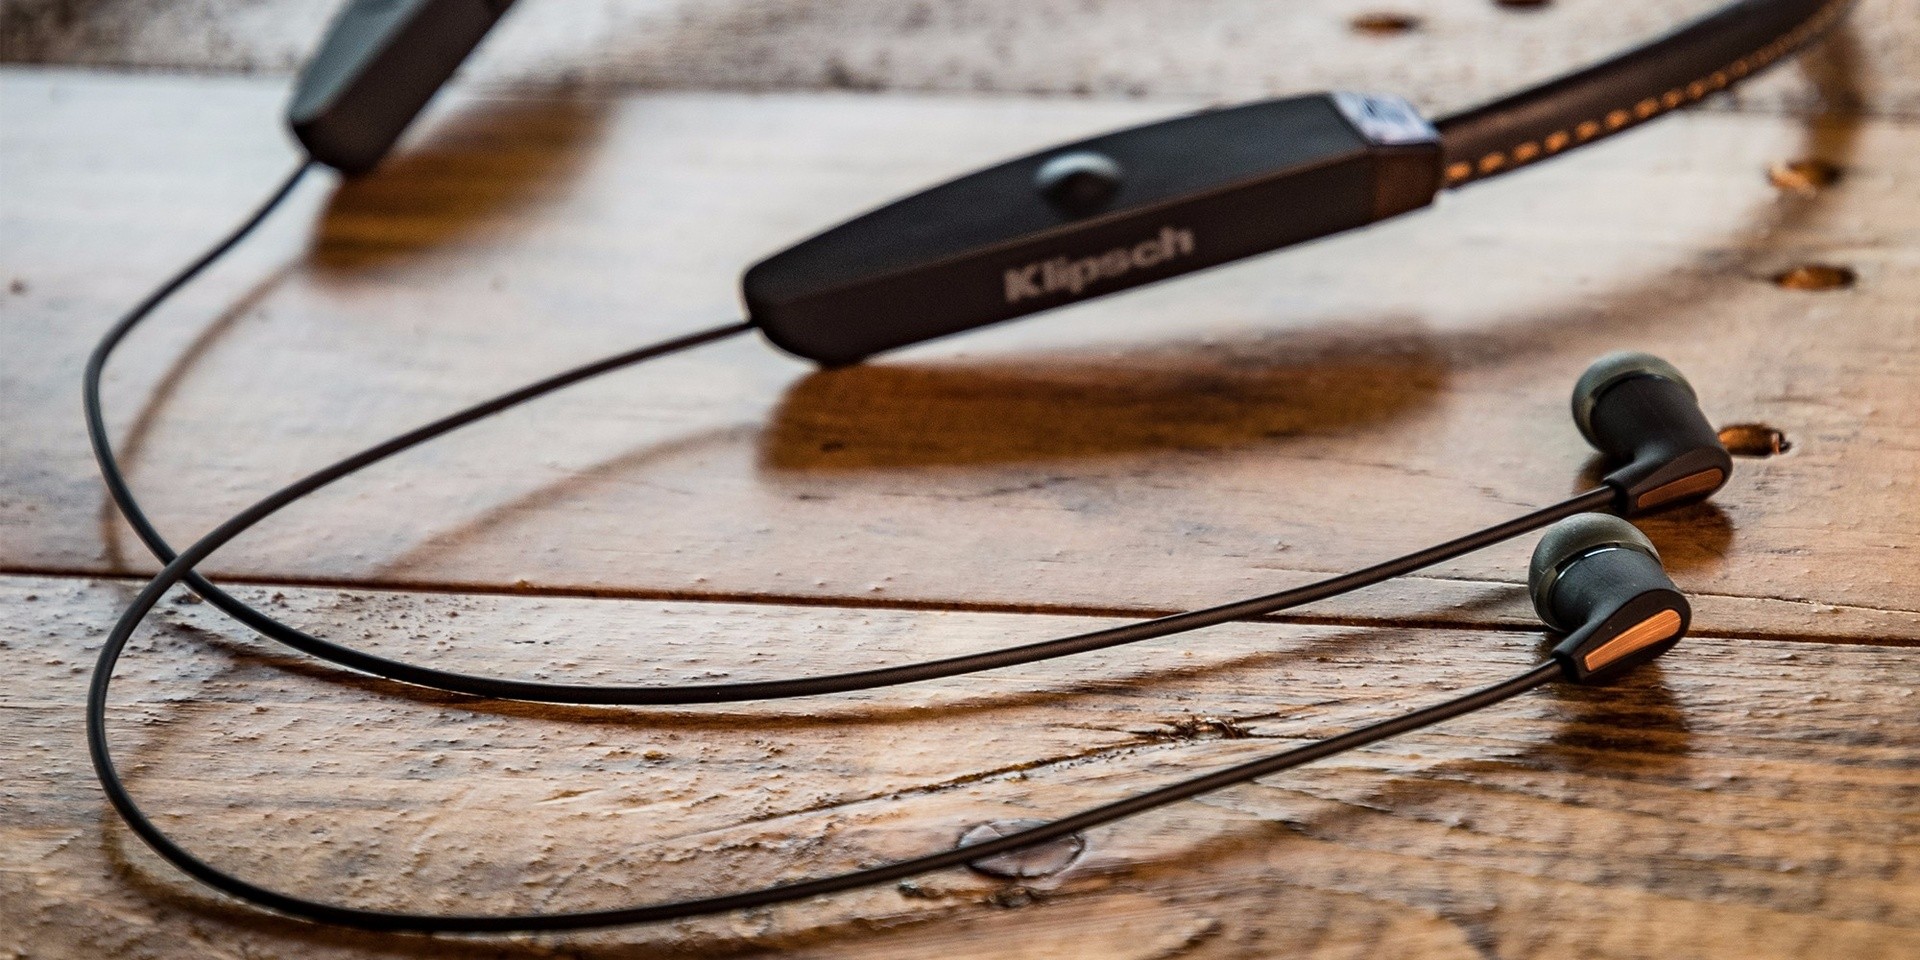 Klipsch unveil their newest headphones, and they are a thing of beauty